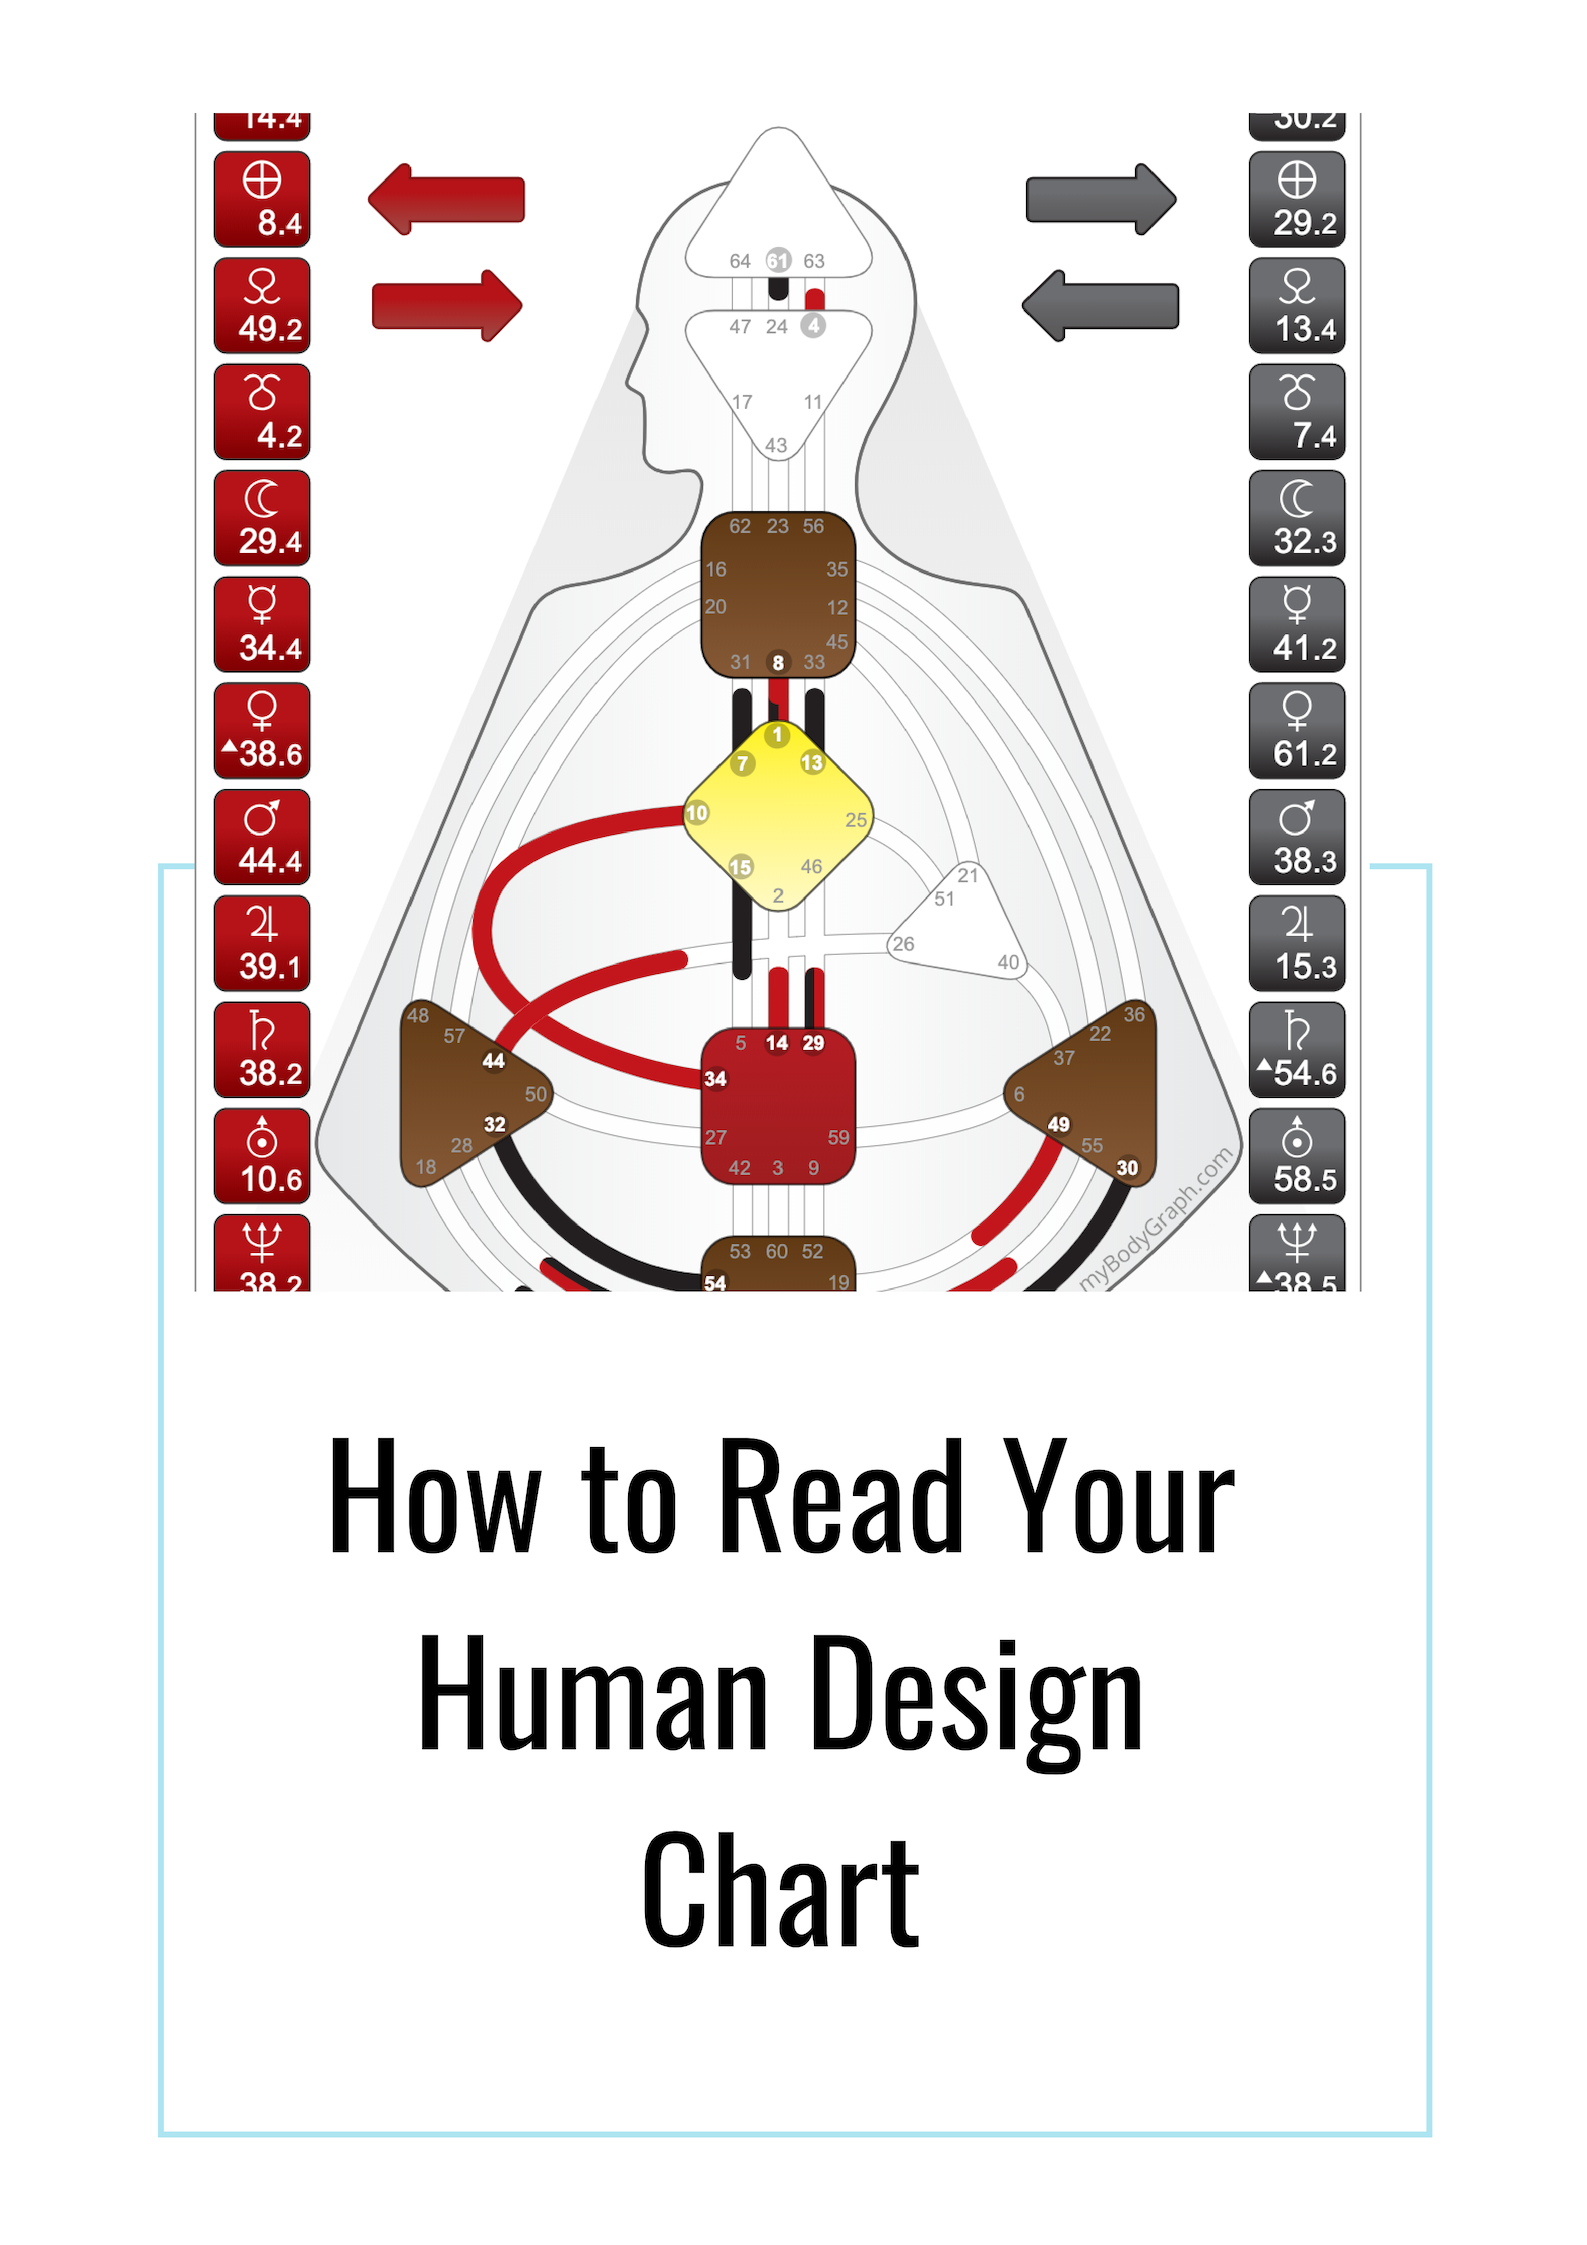 How To Read Human Design Chart